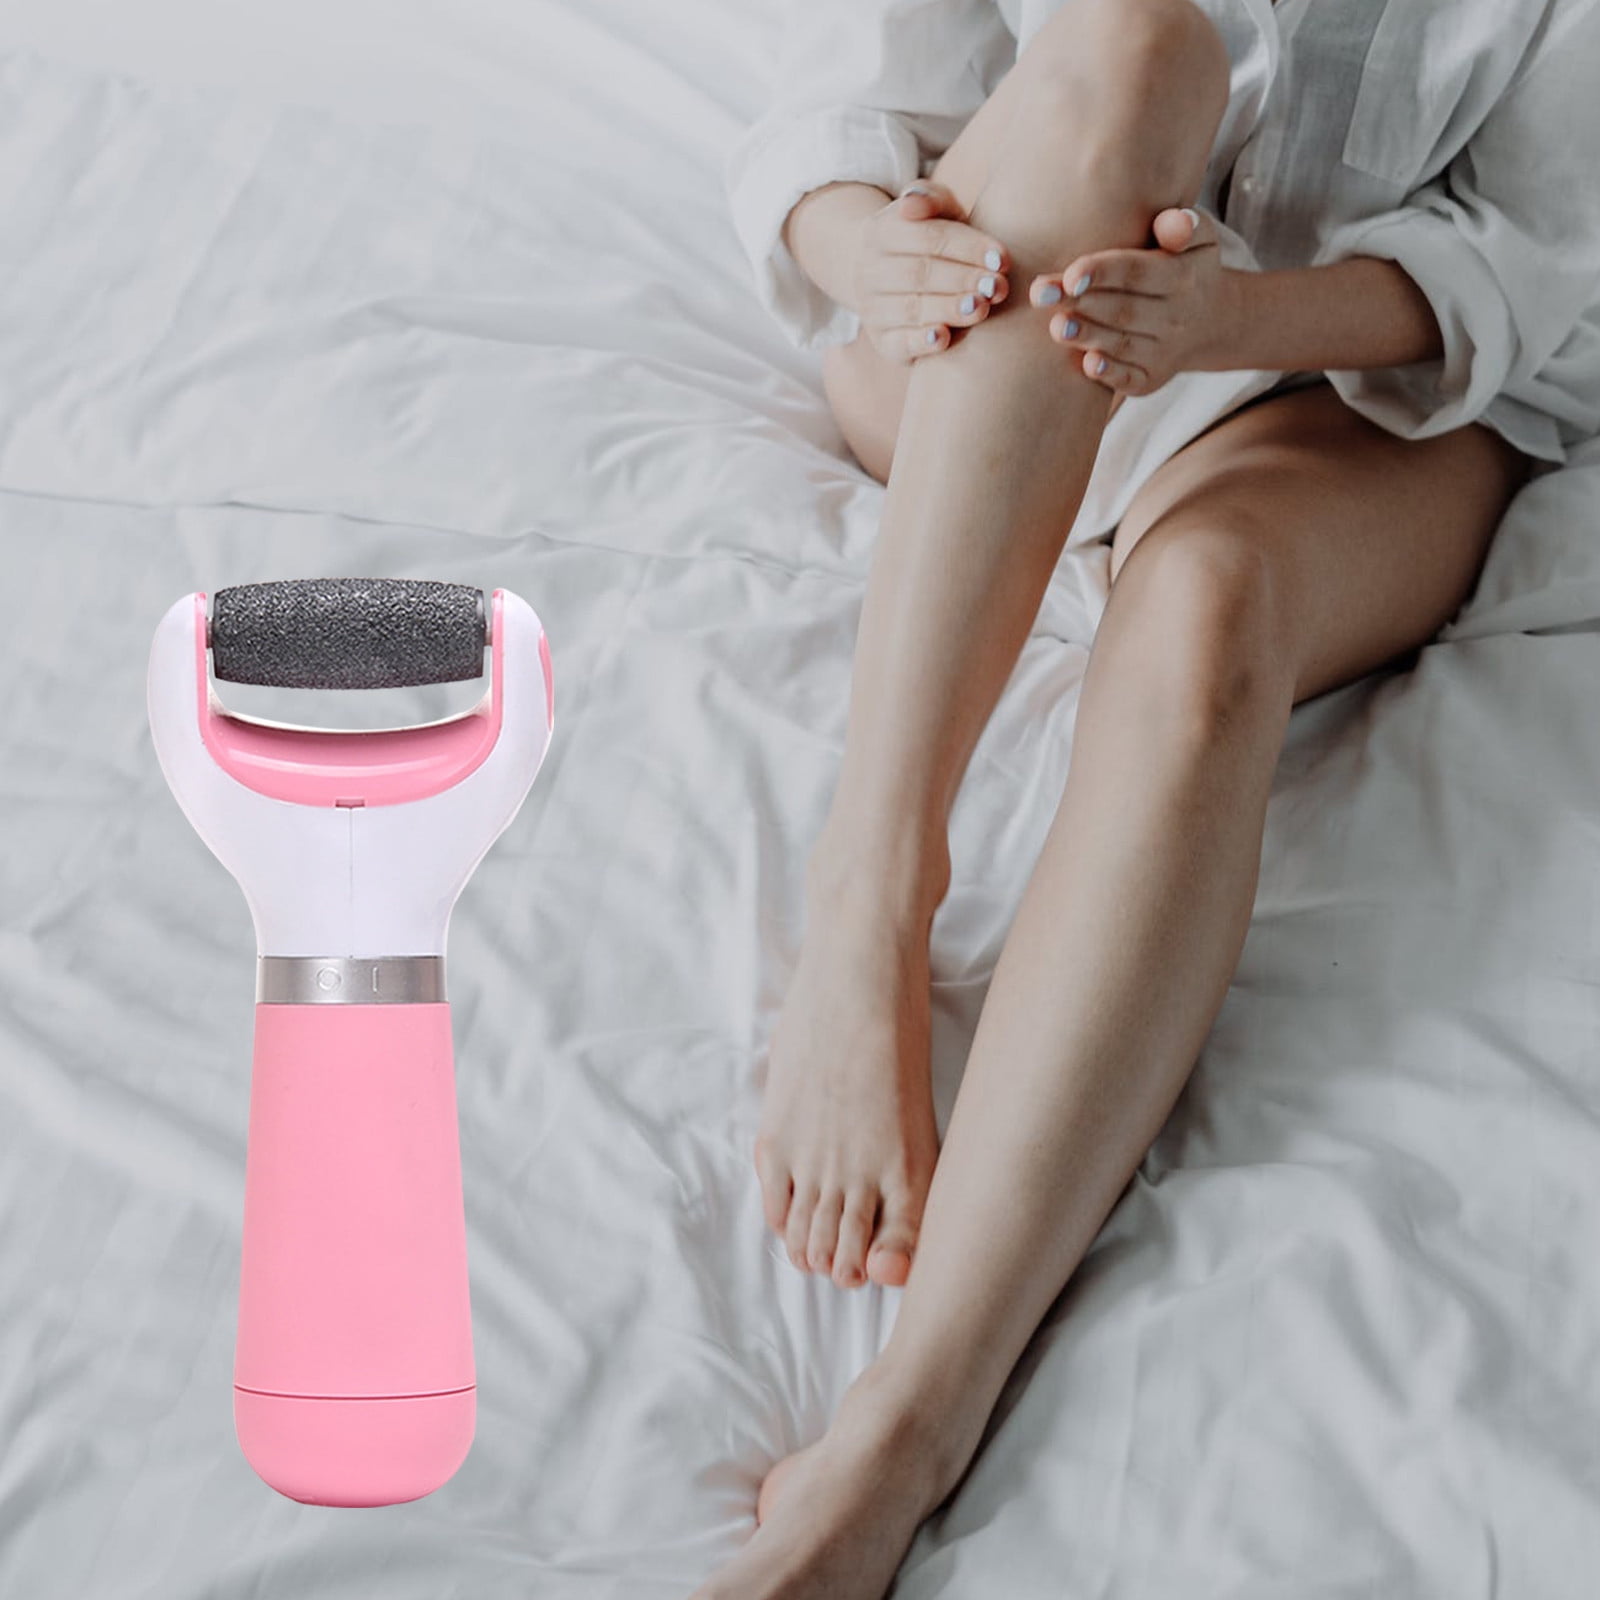 FREYARA Electric Foot Callus Remover for Dead Hard Cracked Dry